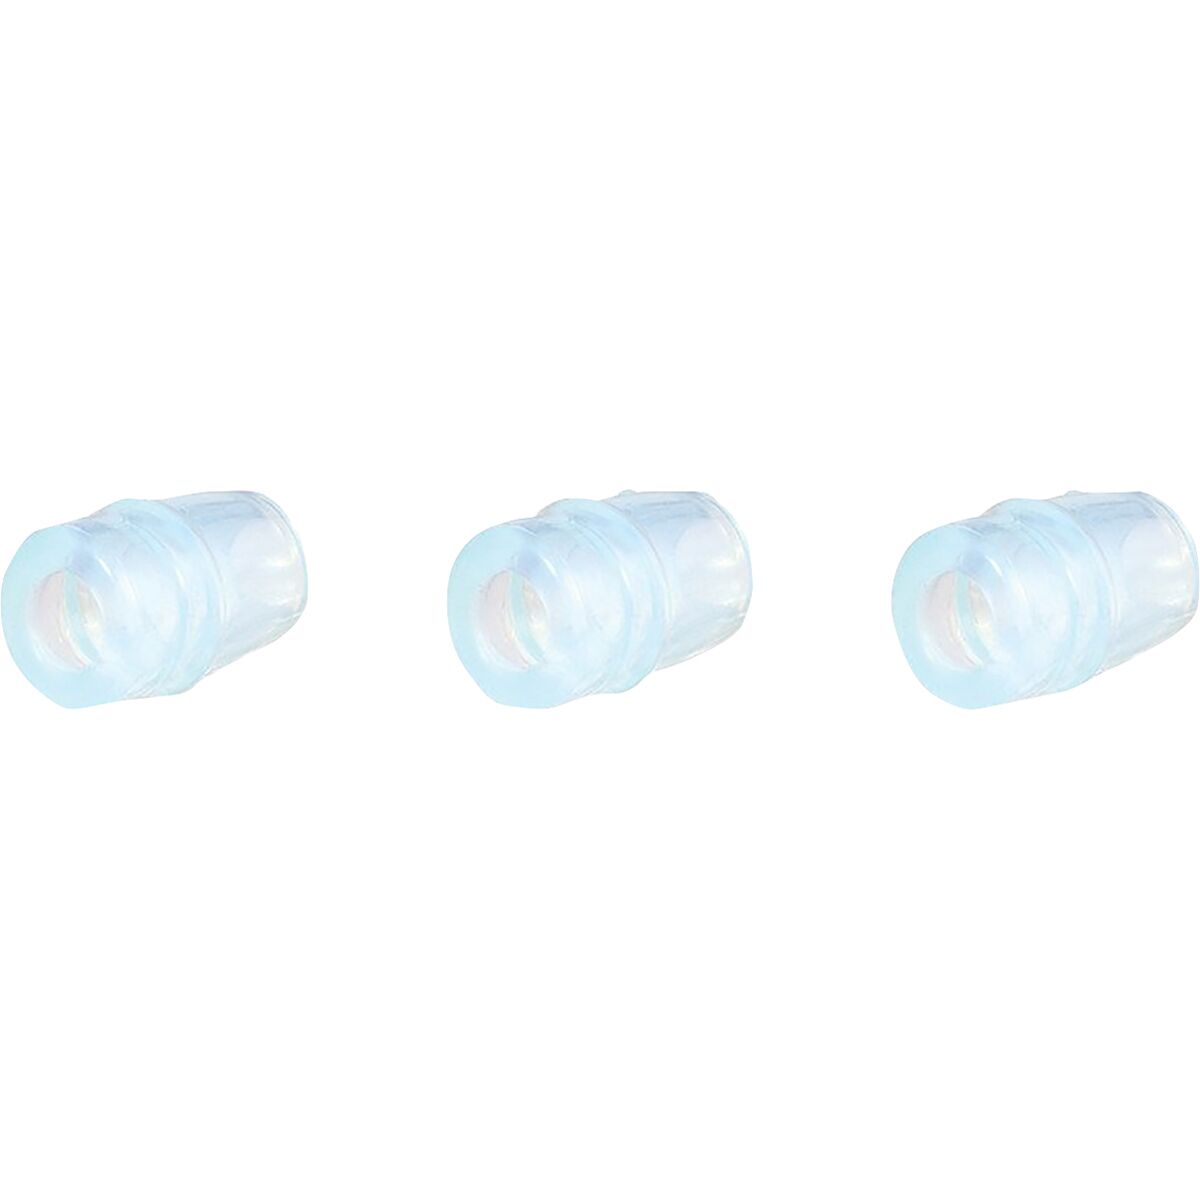 Osprey Packs Hydraulics Silicone Nozzle 3 Pack